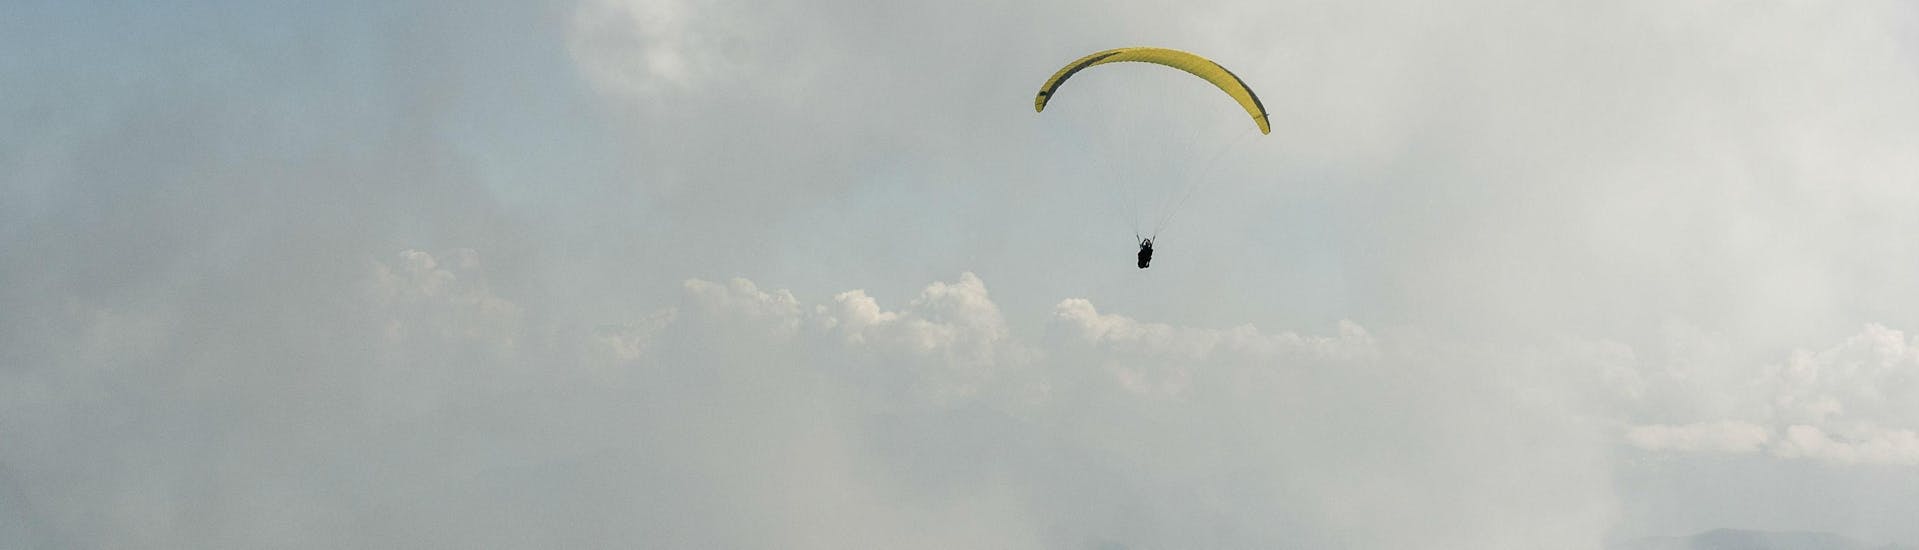 A paraglider is flying among the clouds during their Tandem Paragliding "Performance" - Chartreuse with Prévol Paragliding.